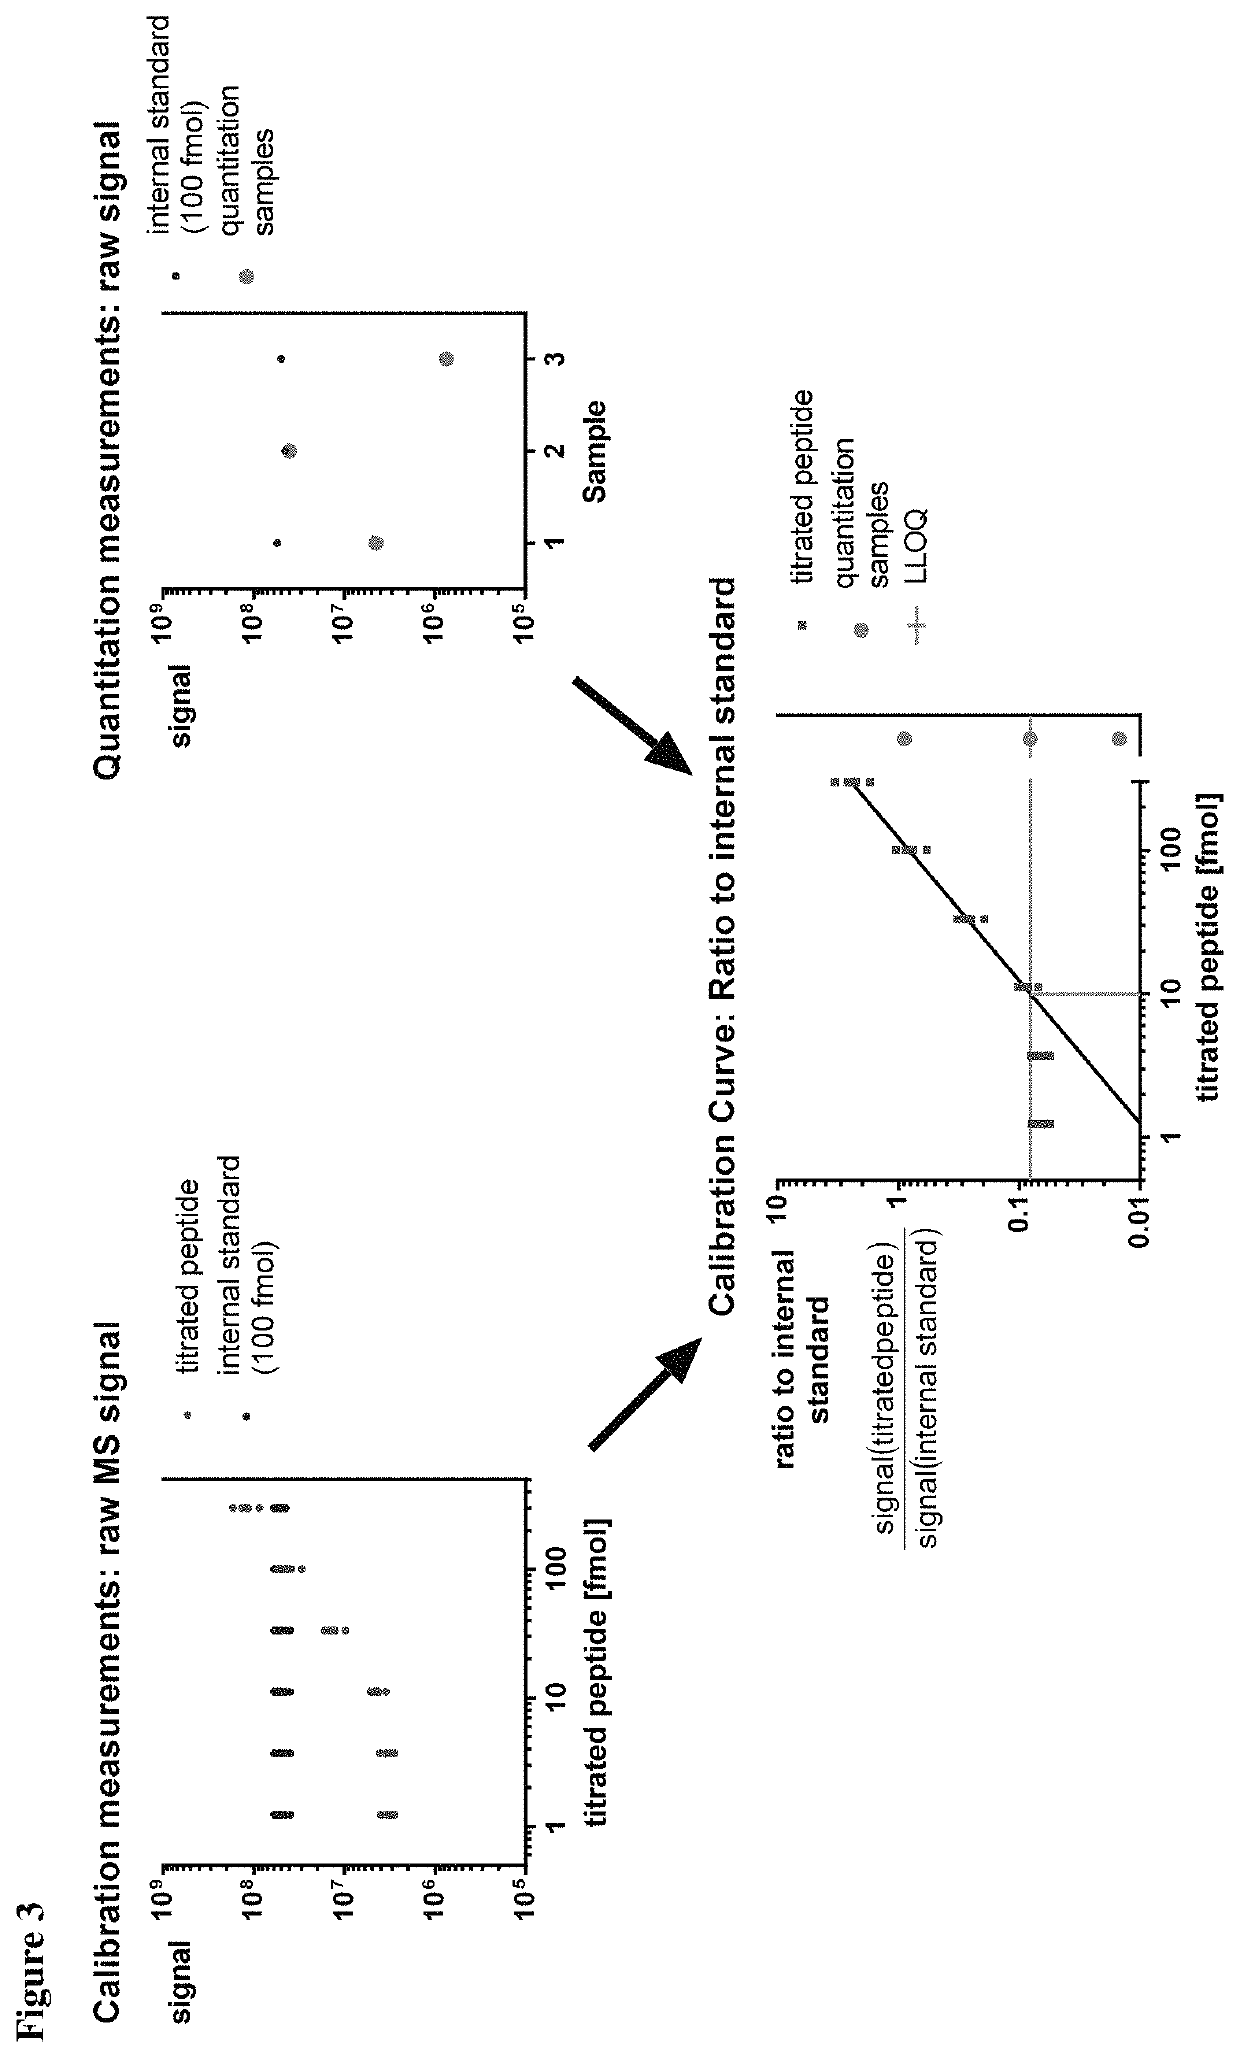 Method for the absolute quantification of naturally processed HLA-restricted cancer peptides